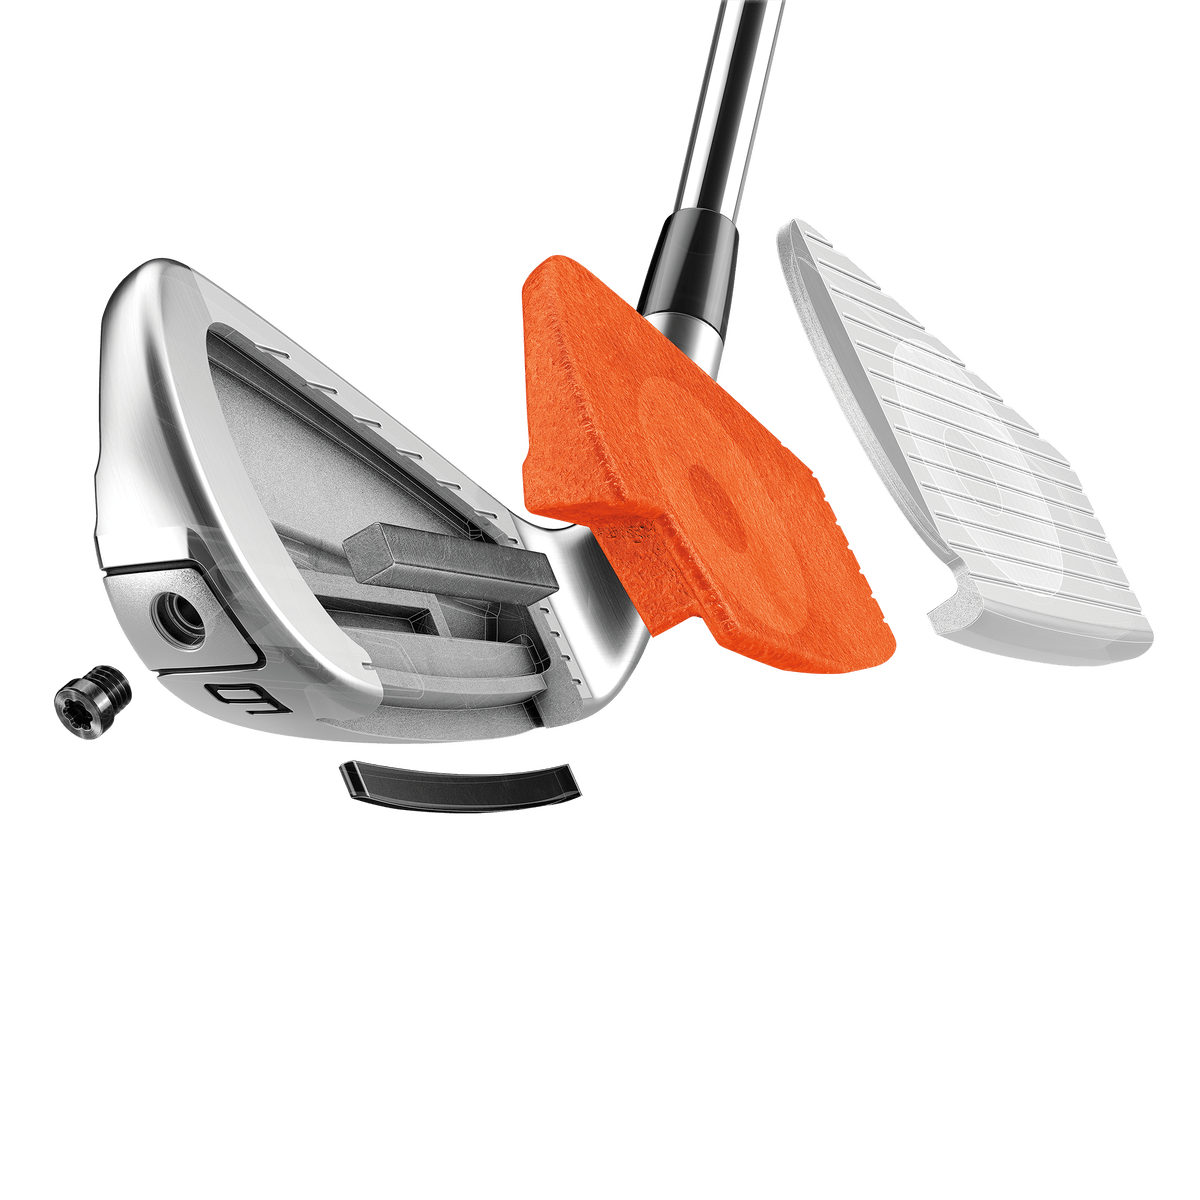 TaylorMade P790 Irons 2019 · Right handed · Graphite · Regular · 4-PW,AW